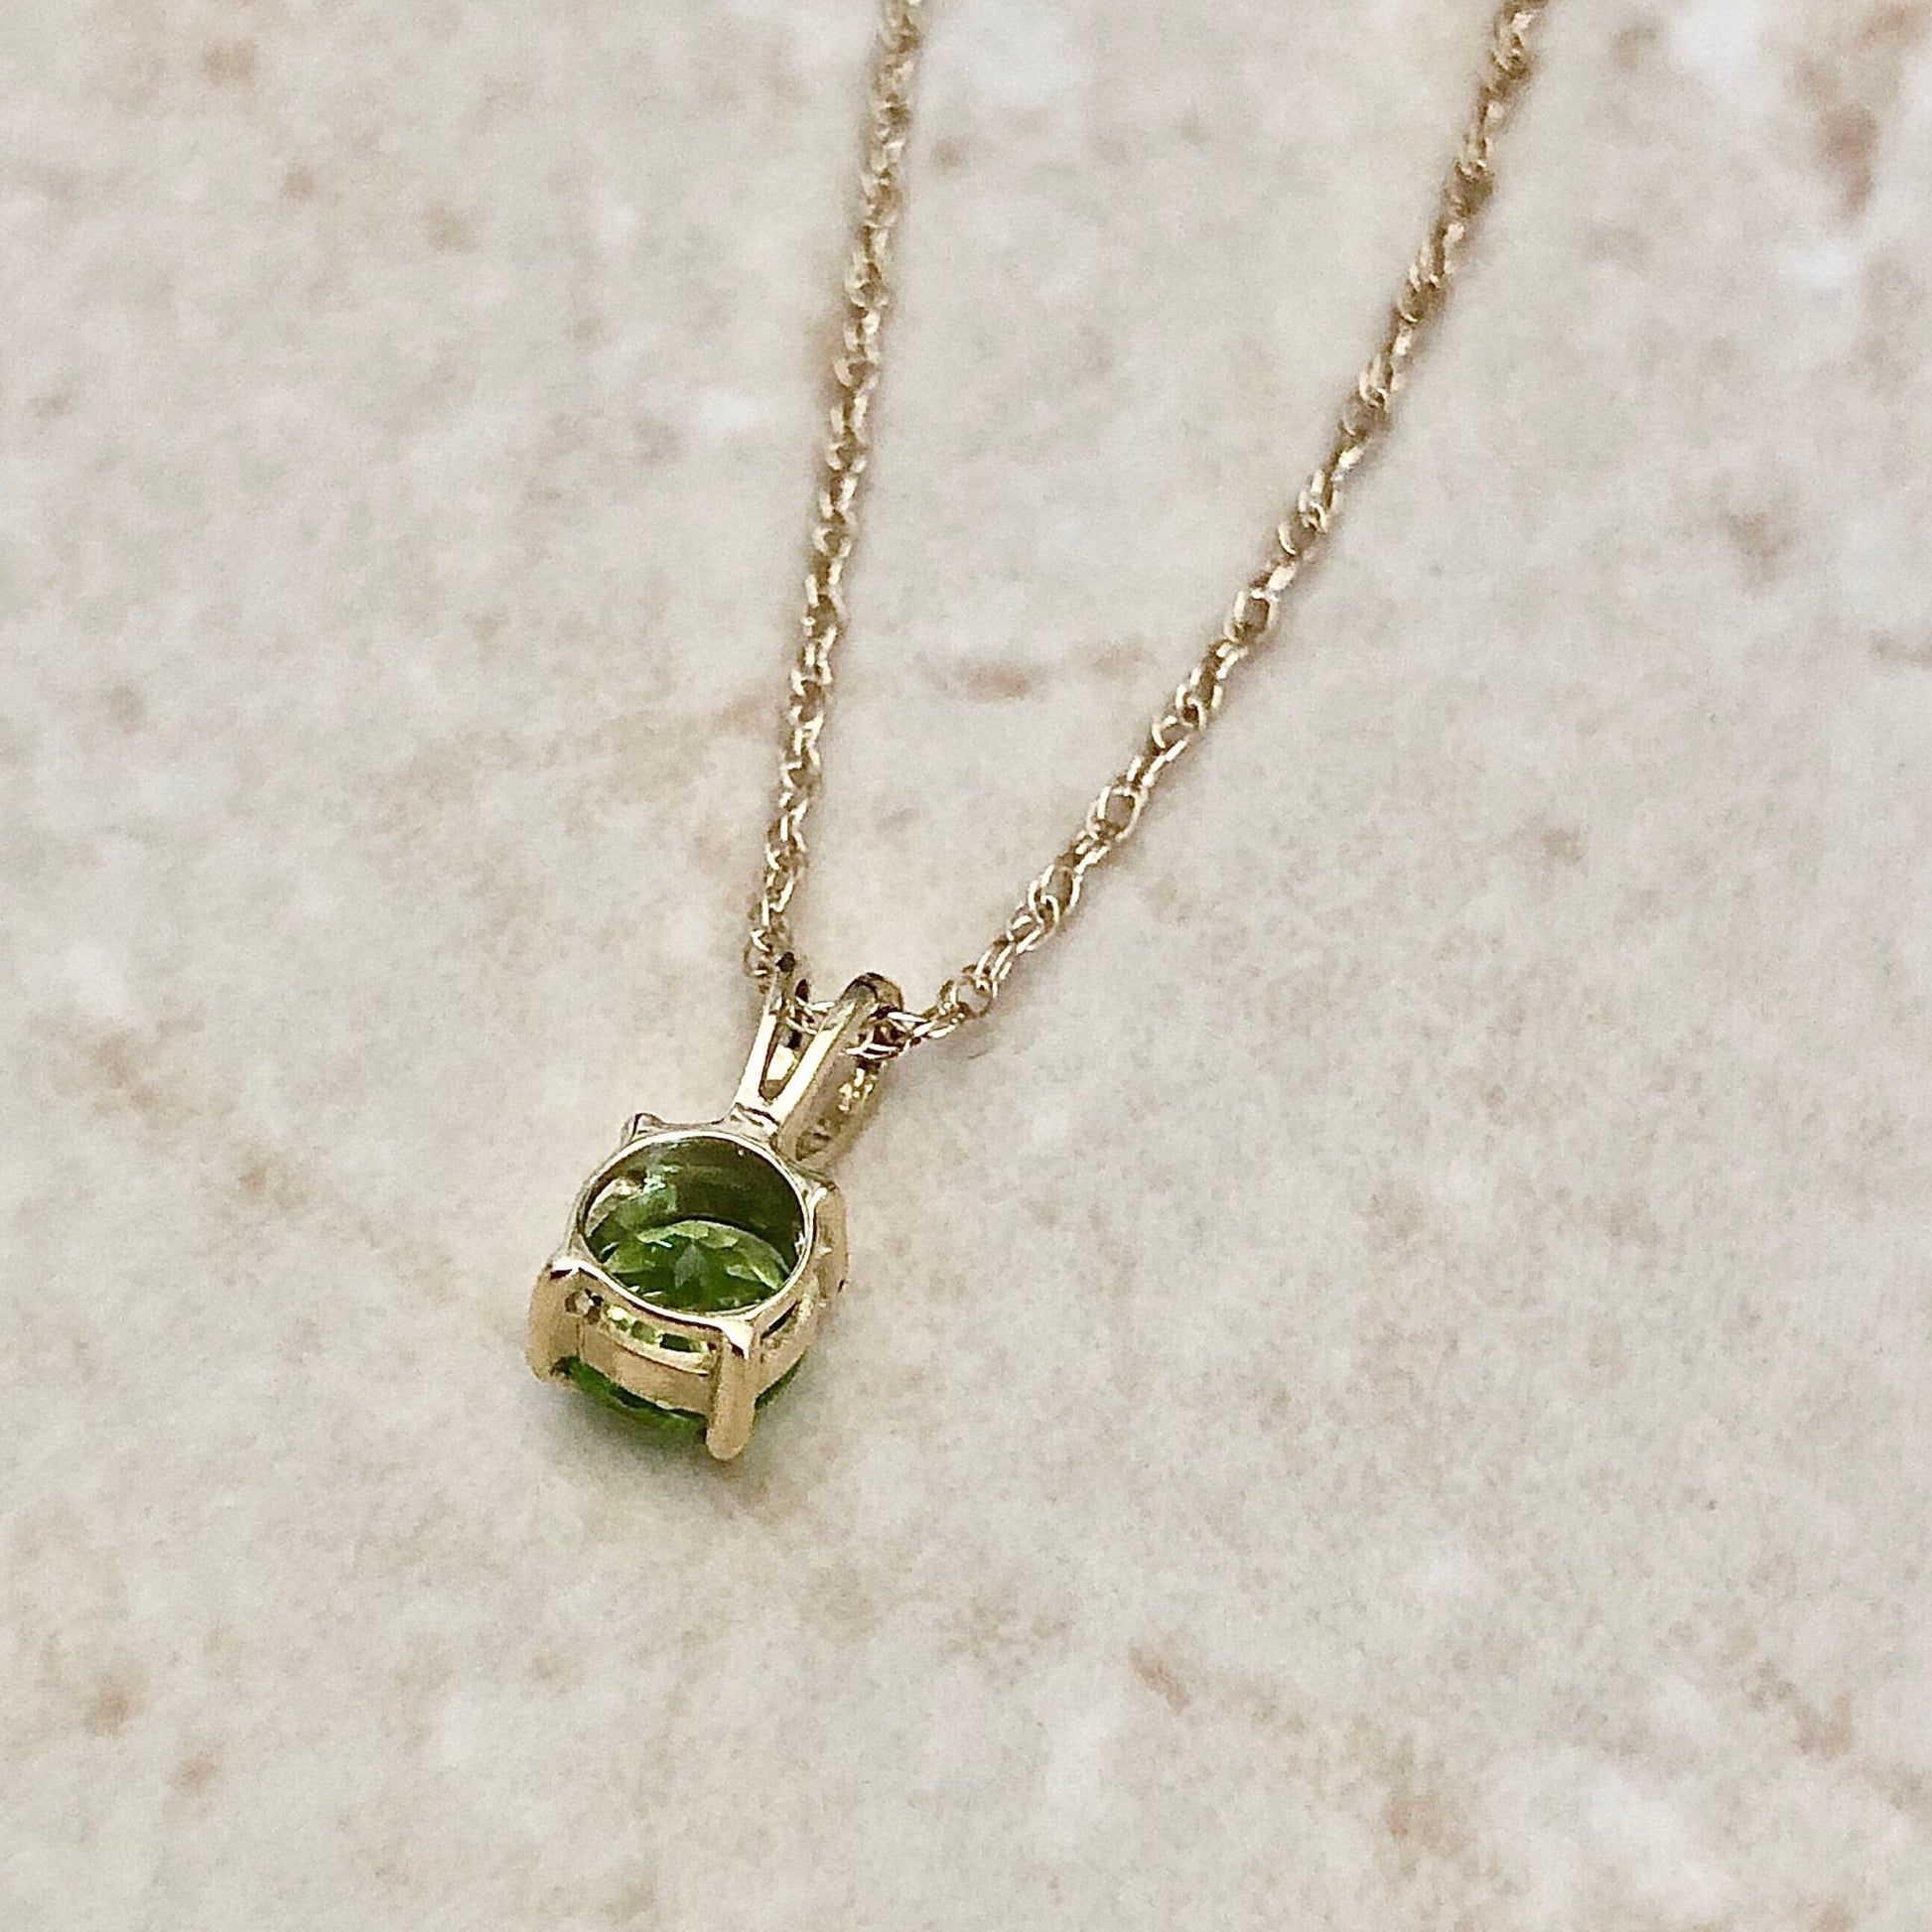 14K Peridot Solitaire Pendant Necklace - Yellow Gold Peridot Pendant Necklace - Round Peridot Necklace - Birthday Gift -Best Gift For Her